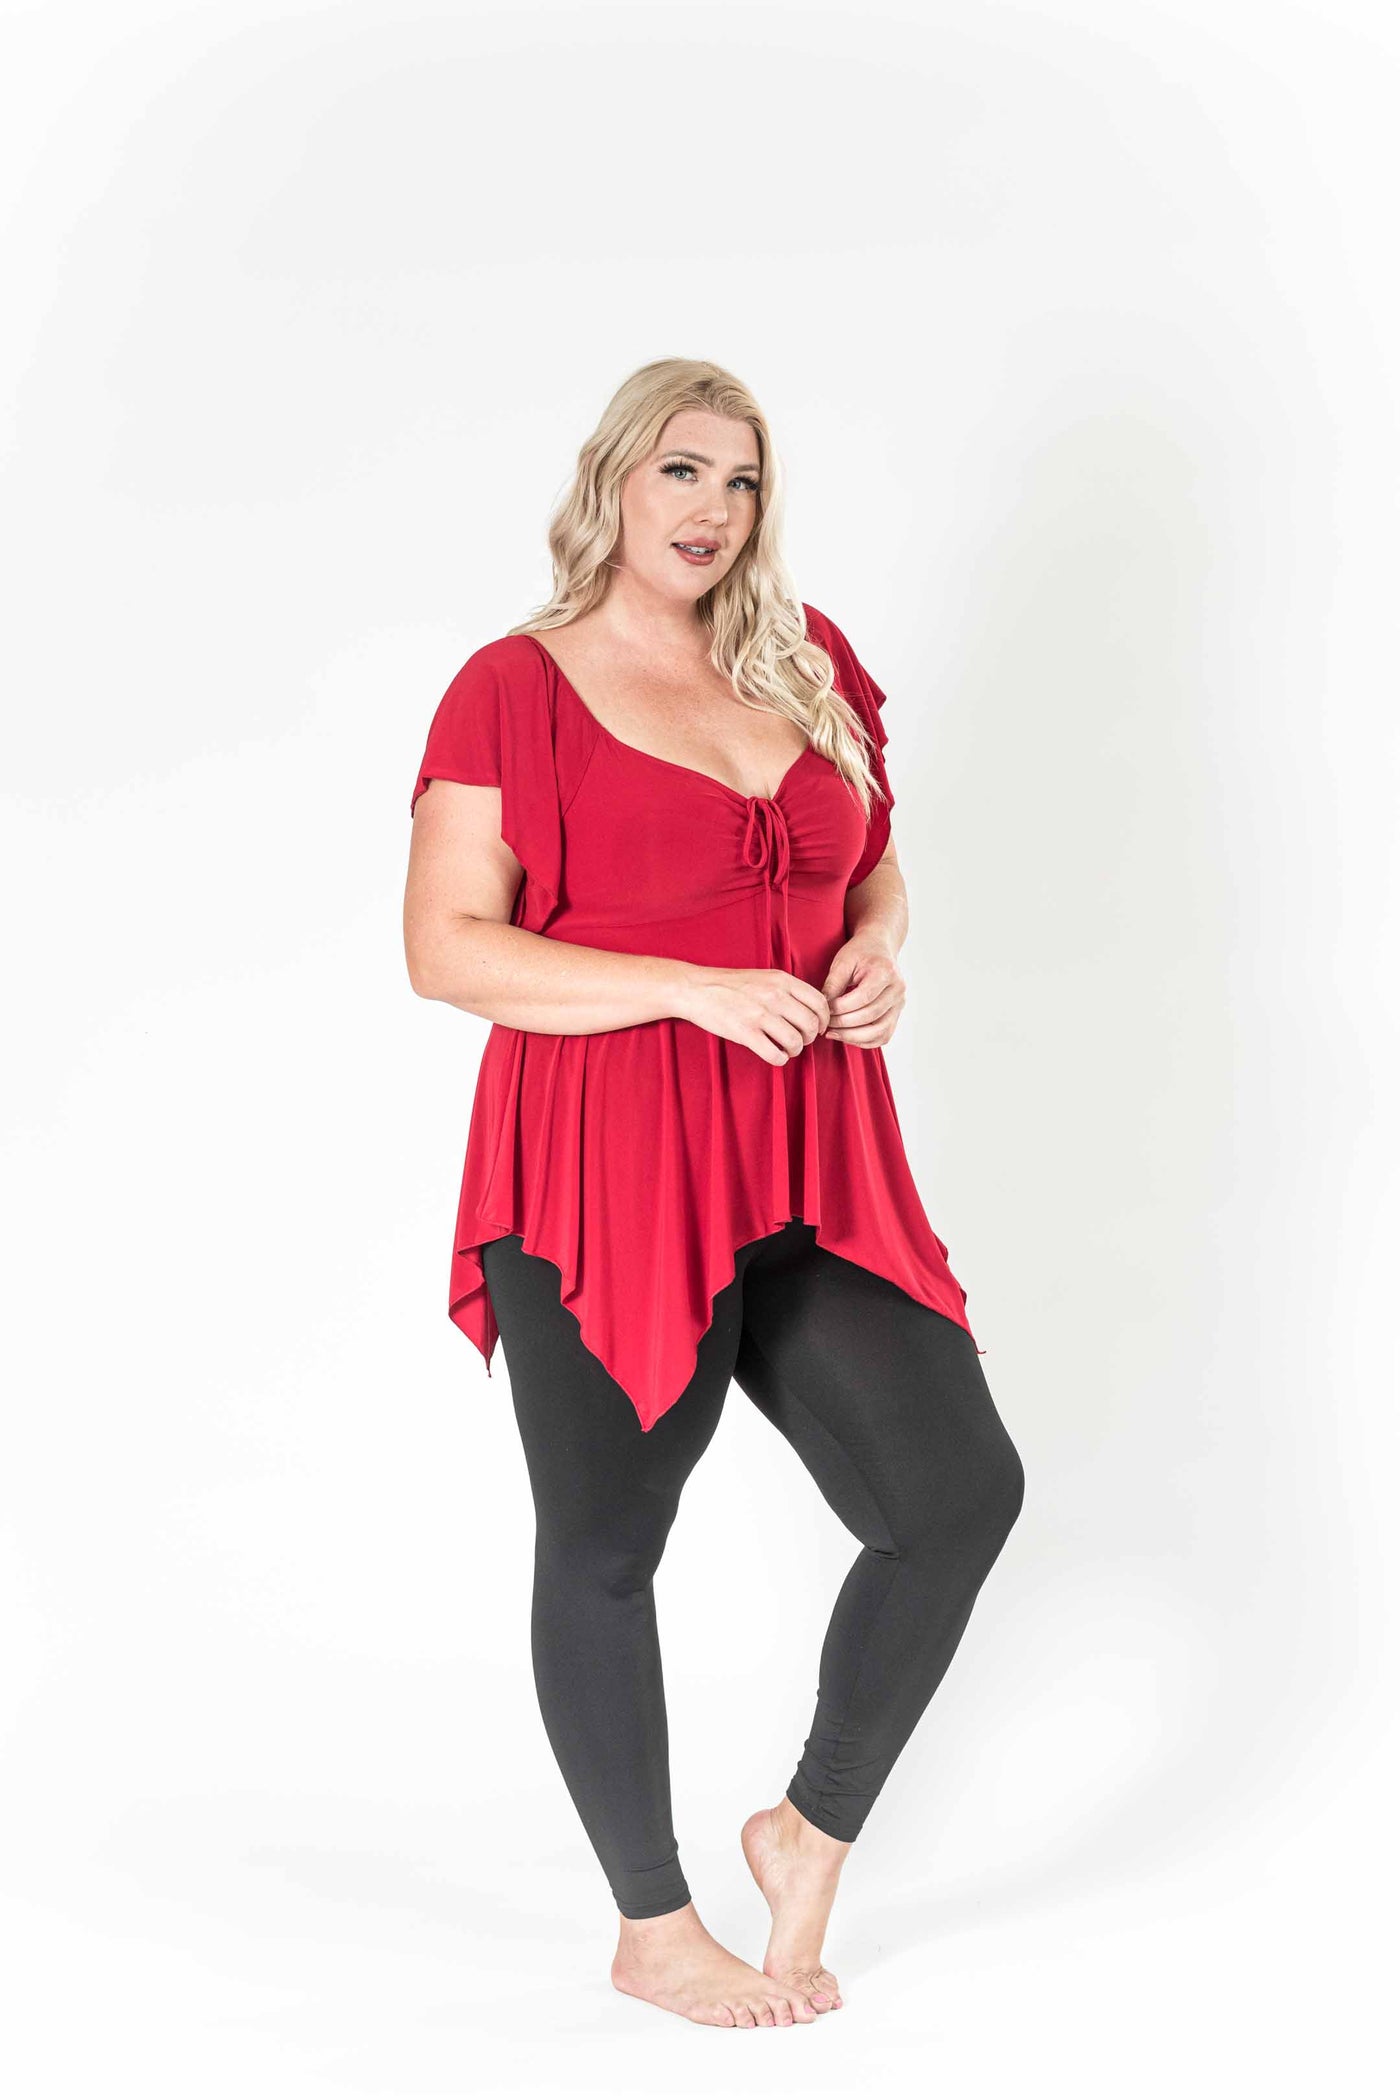 The Fun Red V-Neck Top